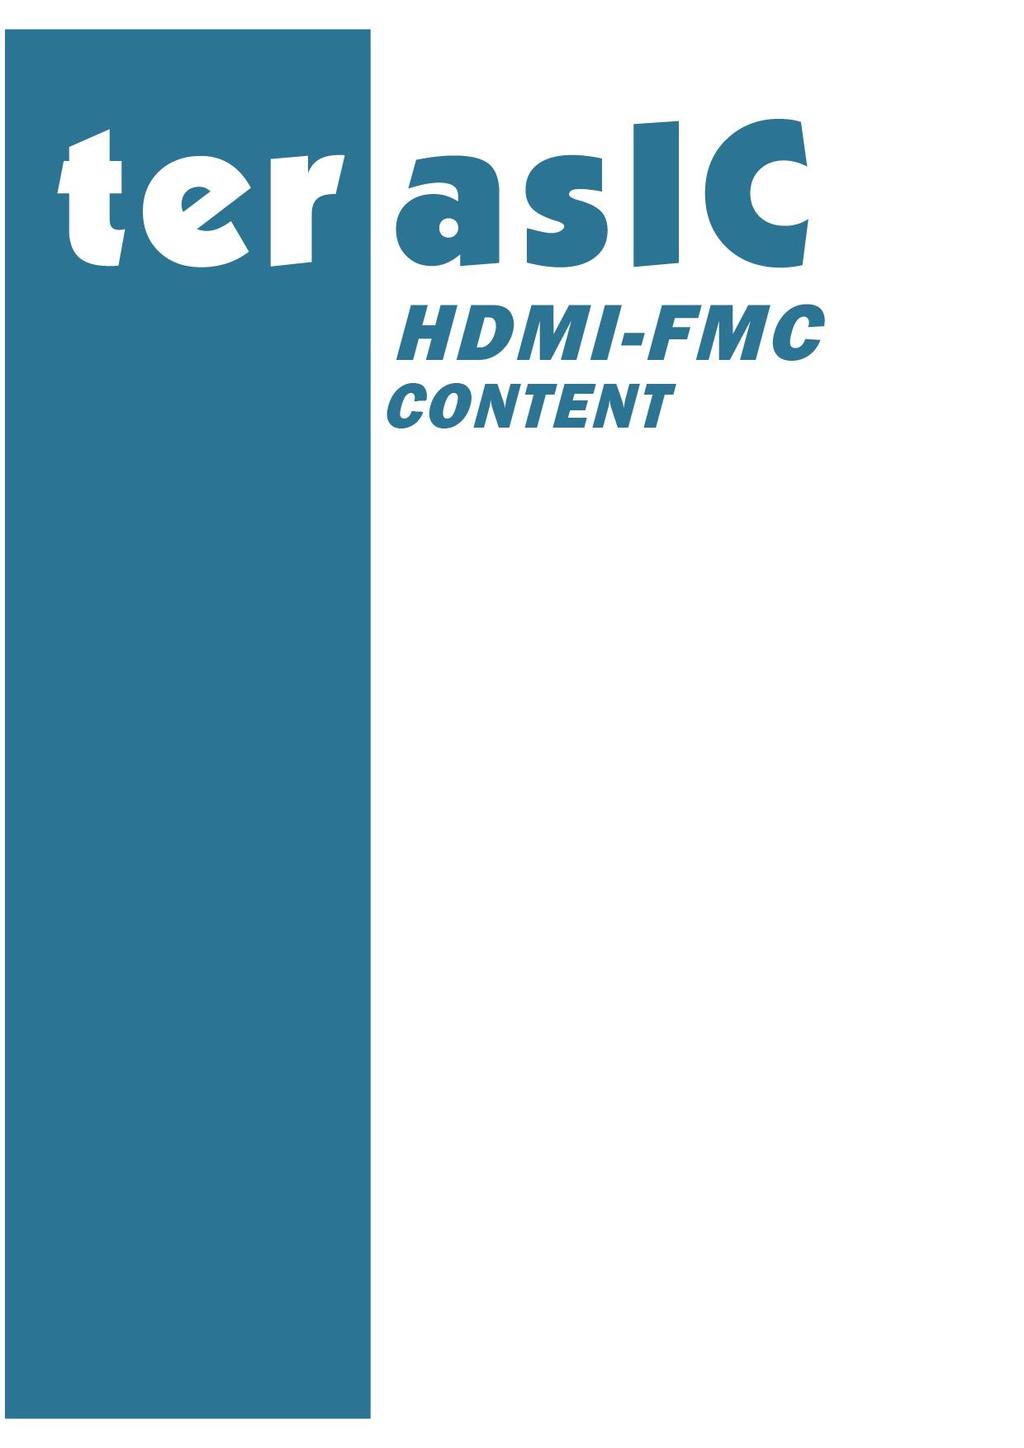 Chapter 1 HDMI-FMC Development Kit... 2 1-1 Package Contents... 3 1-2 HDMI-FMC System CD... 3 1-3 Getting Help... 3 Chapter 2 Introduction of the HDMI-FMC Card... 4 2-1 Features.